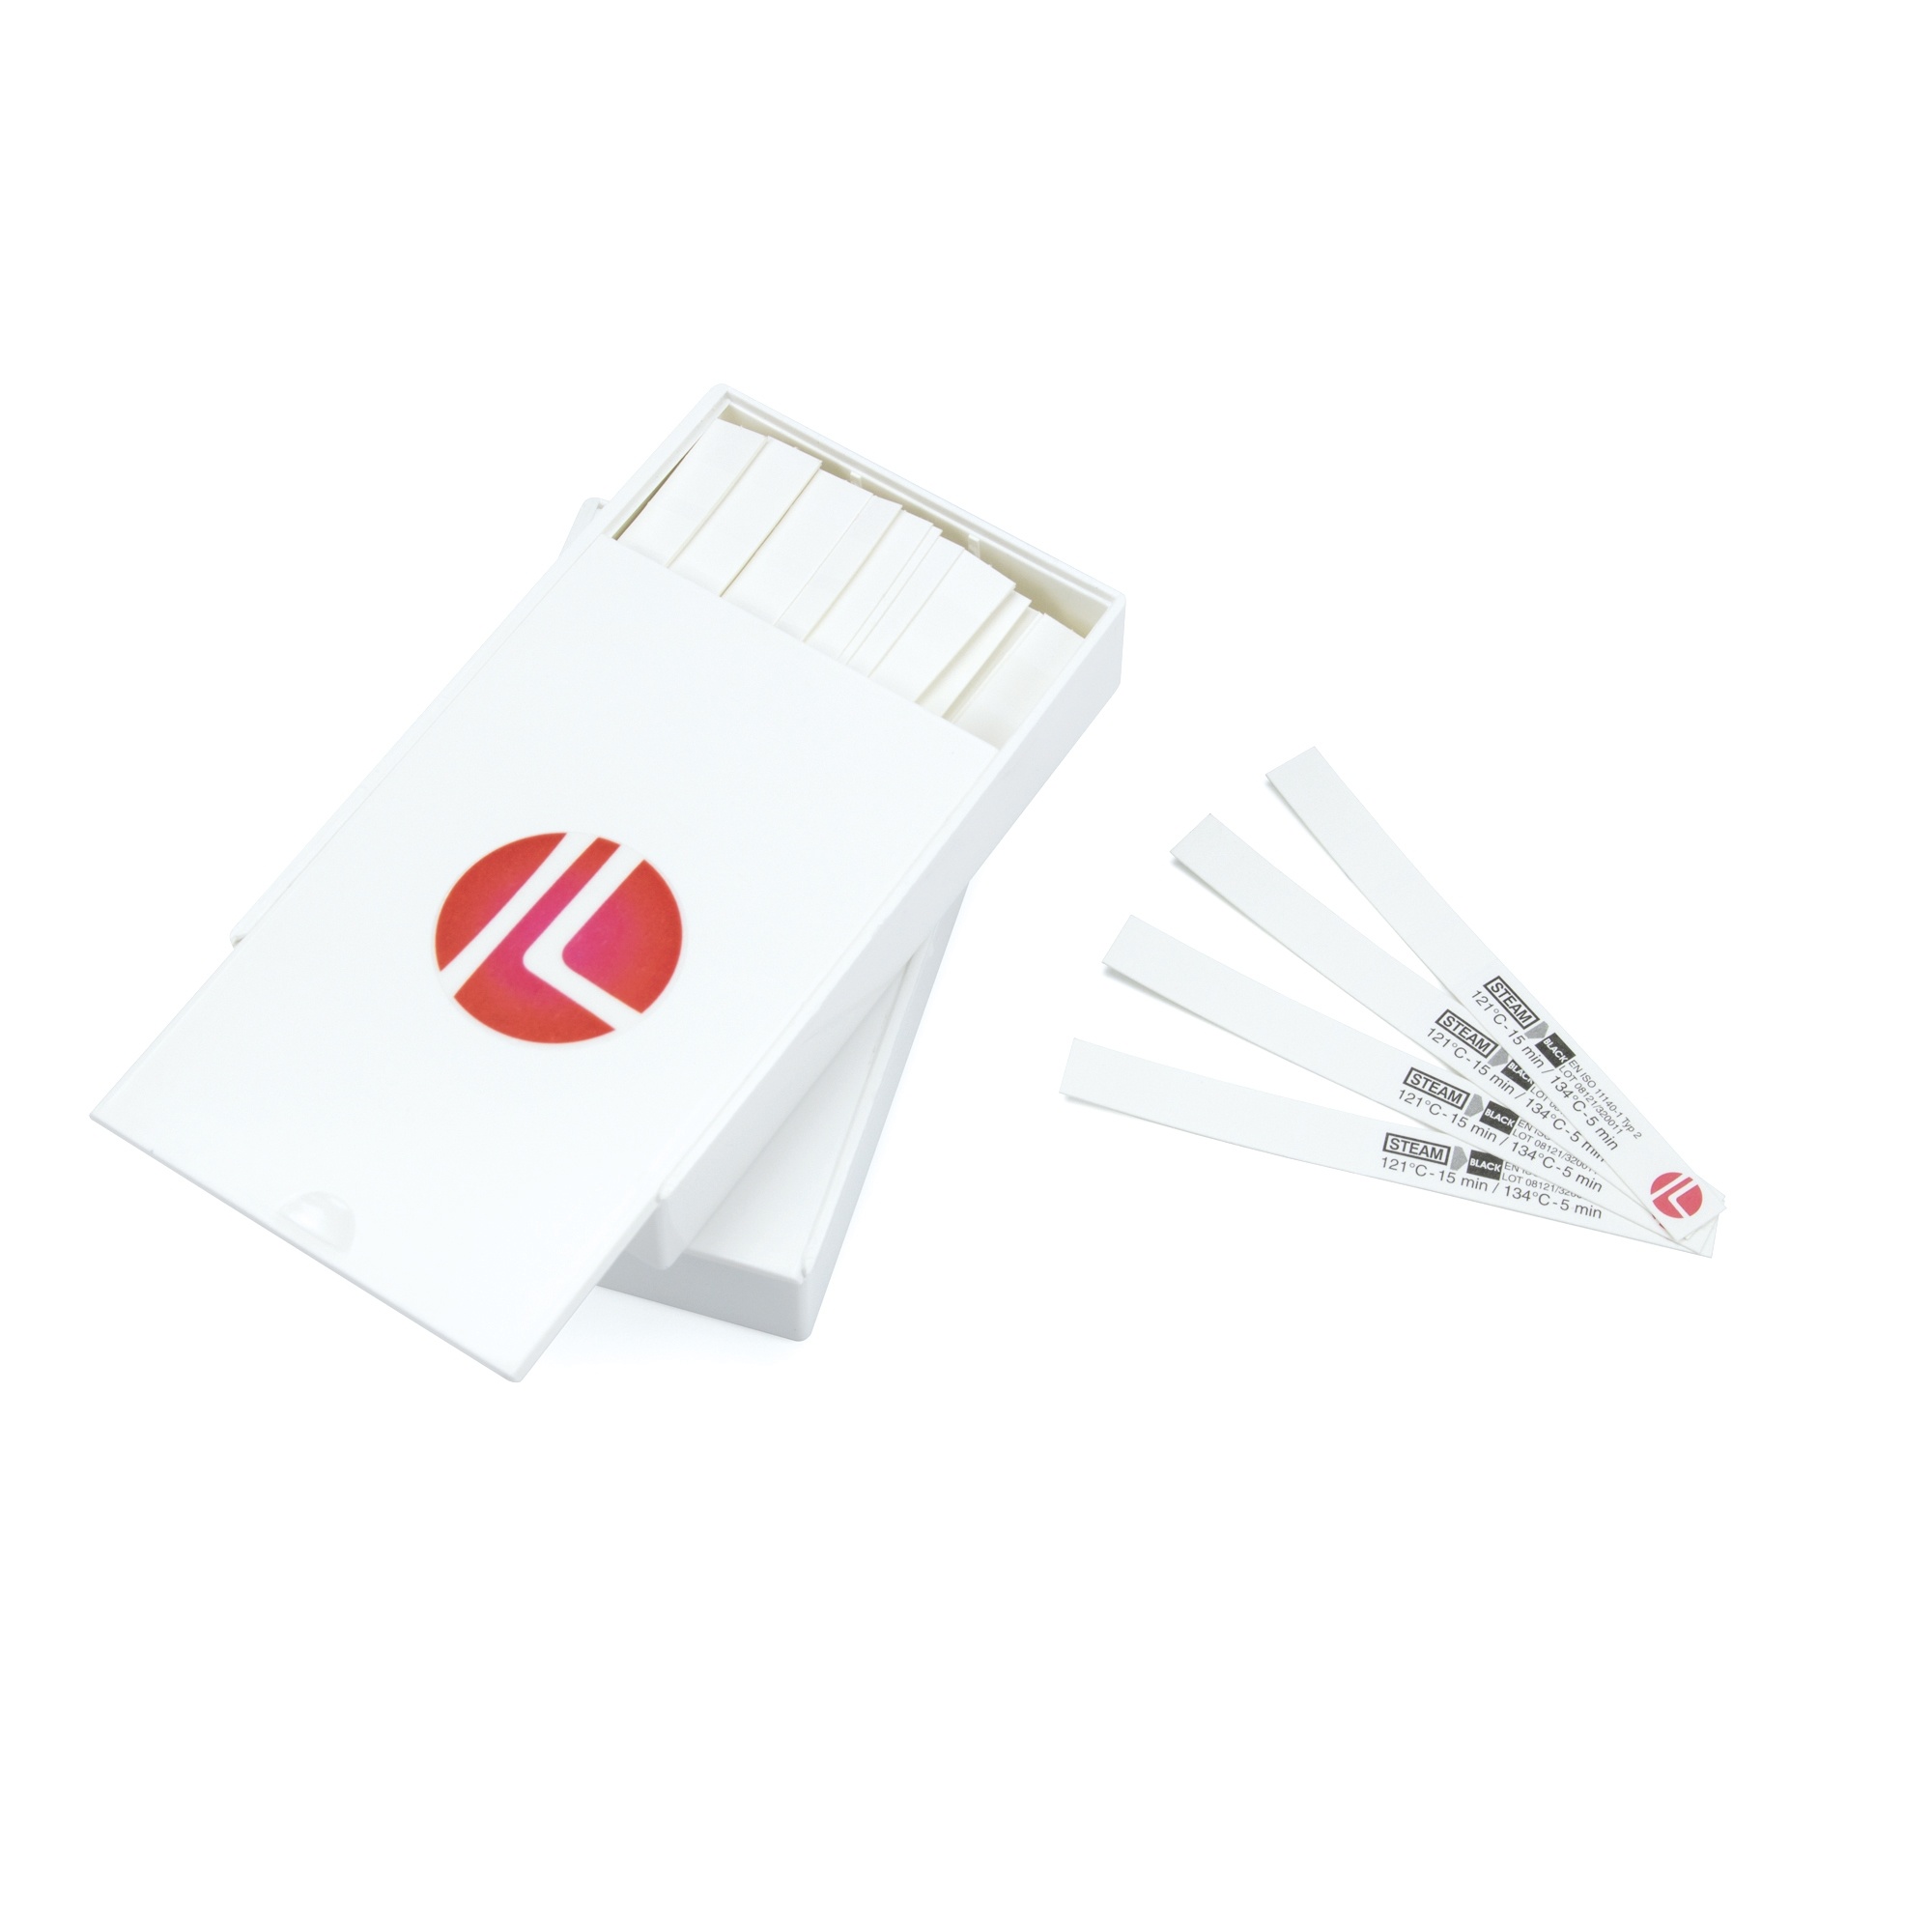 LCpro refill package Image